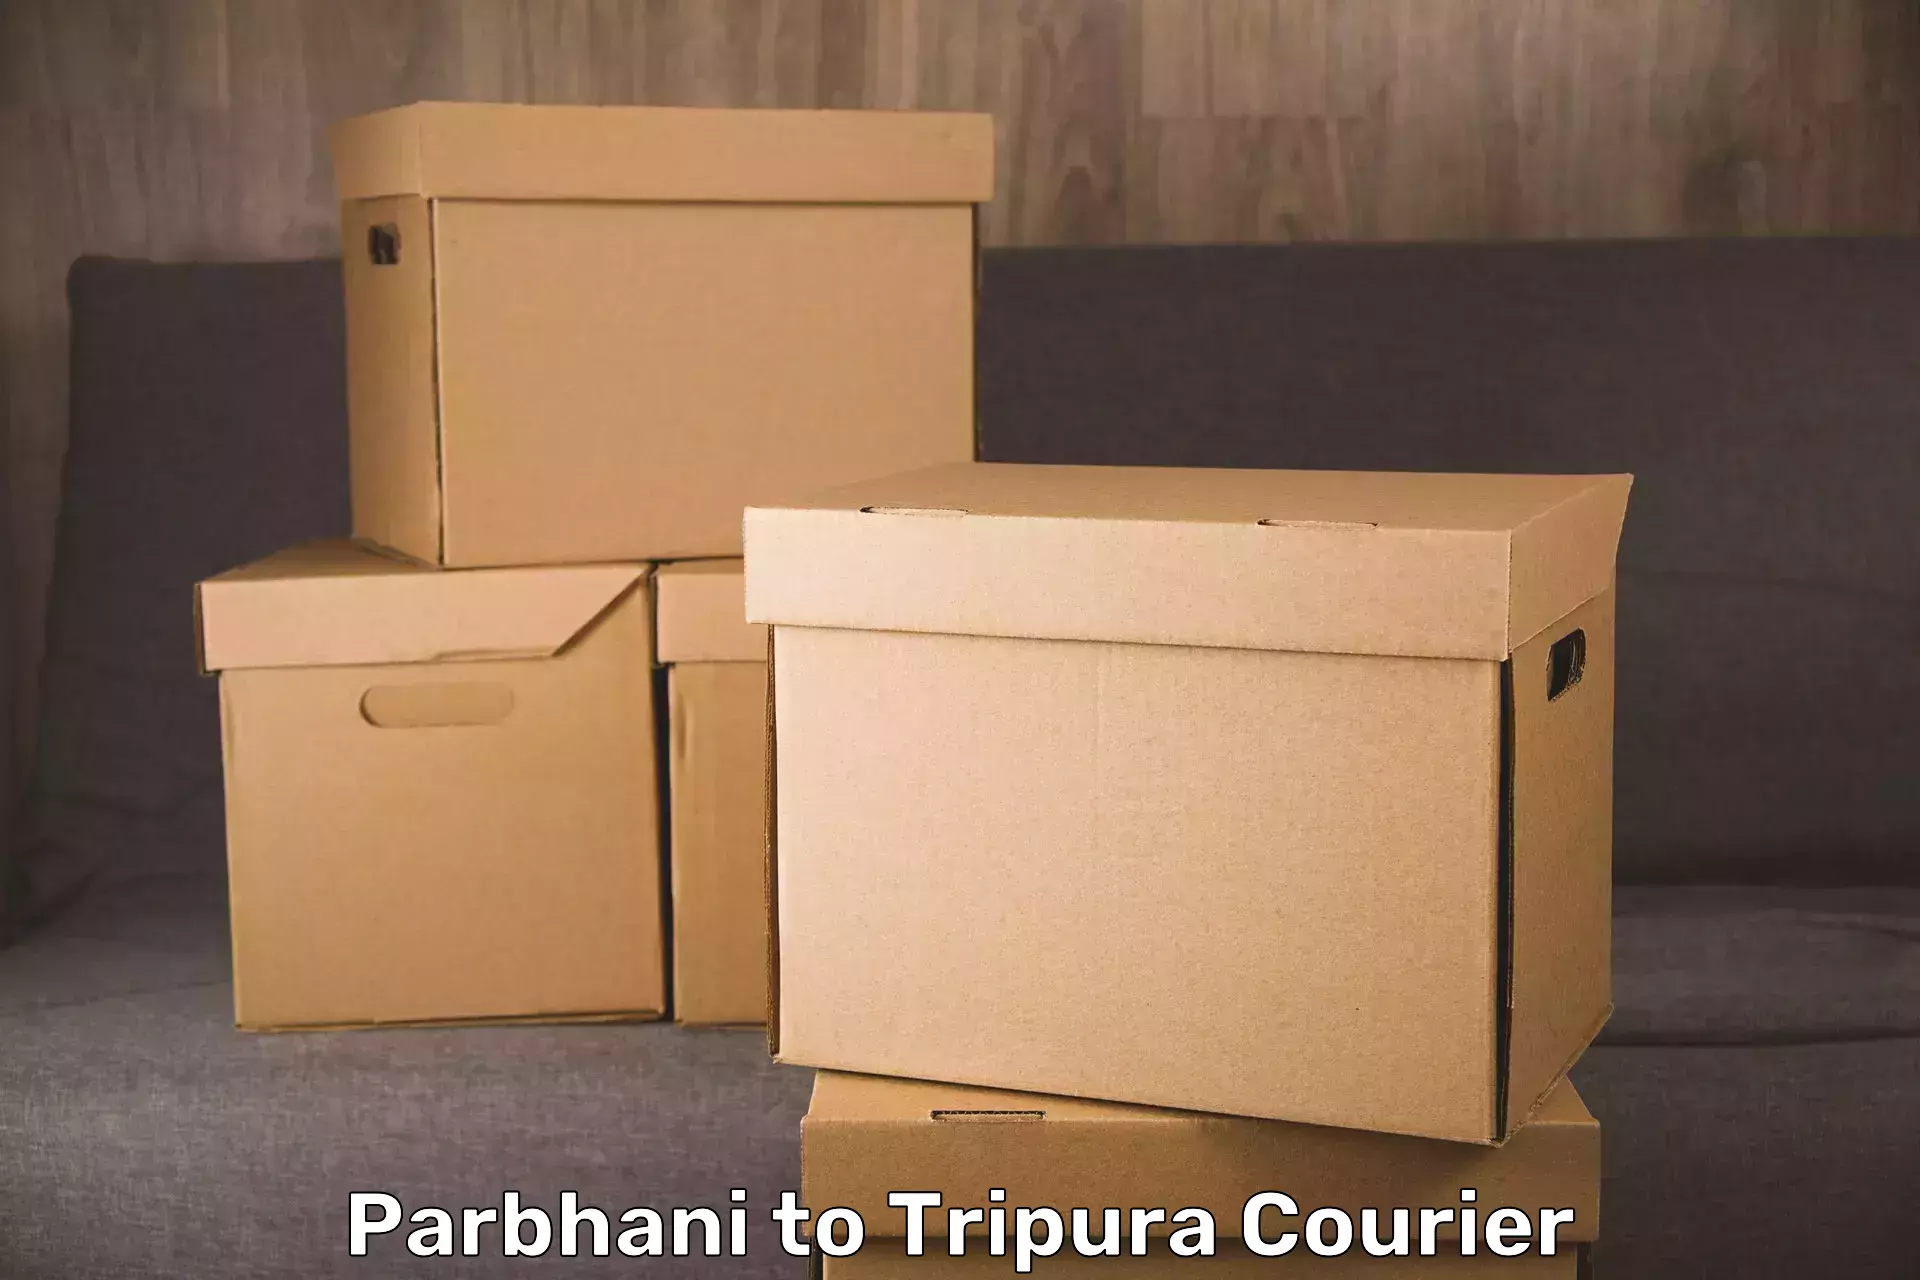 Luggage delivery network Parbhani to Tripura